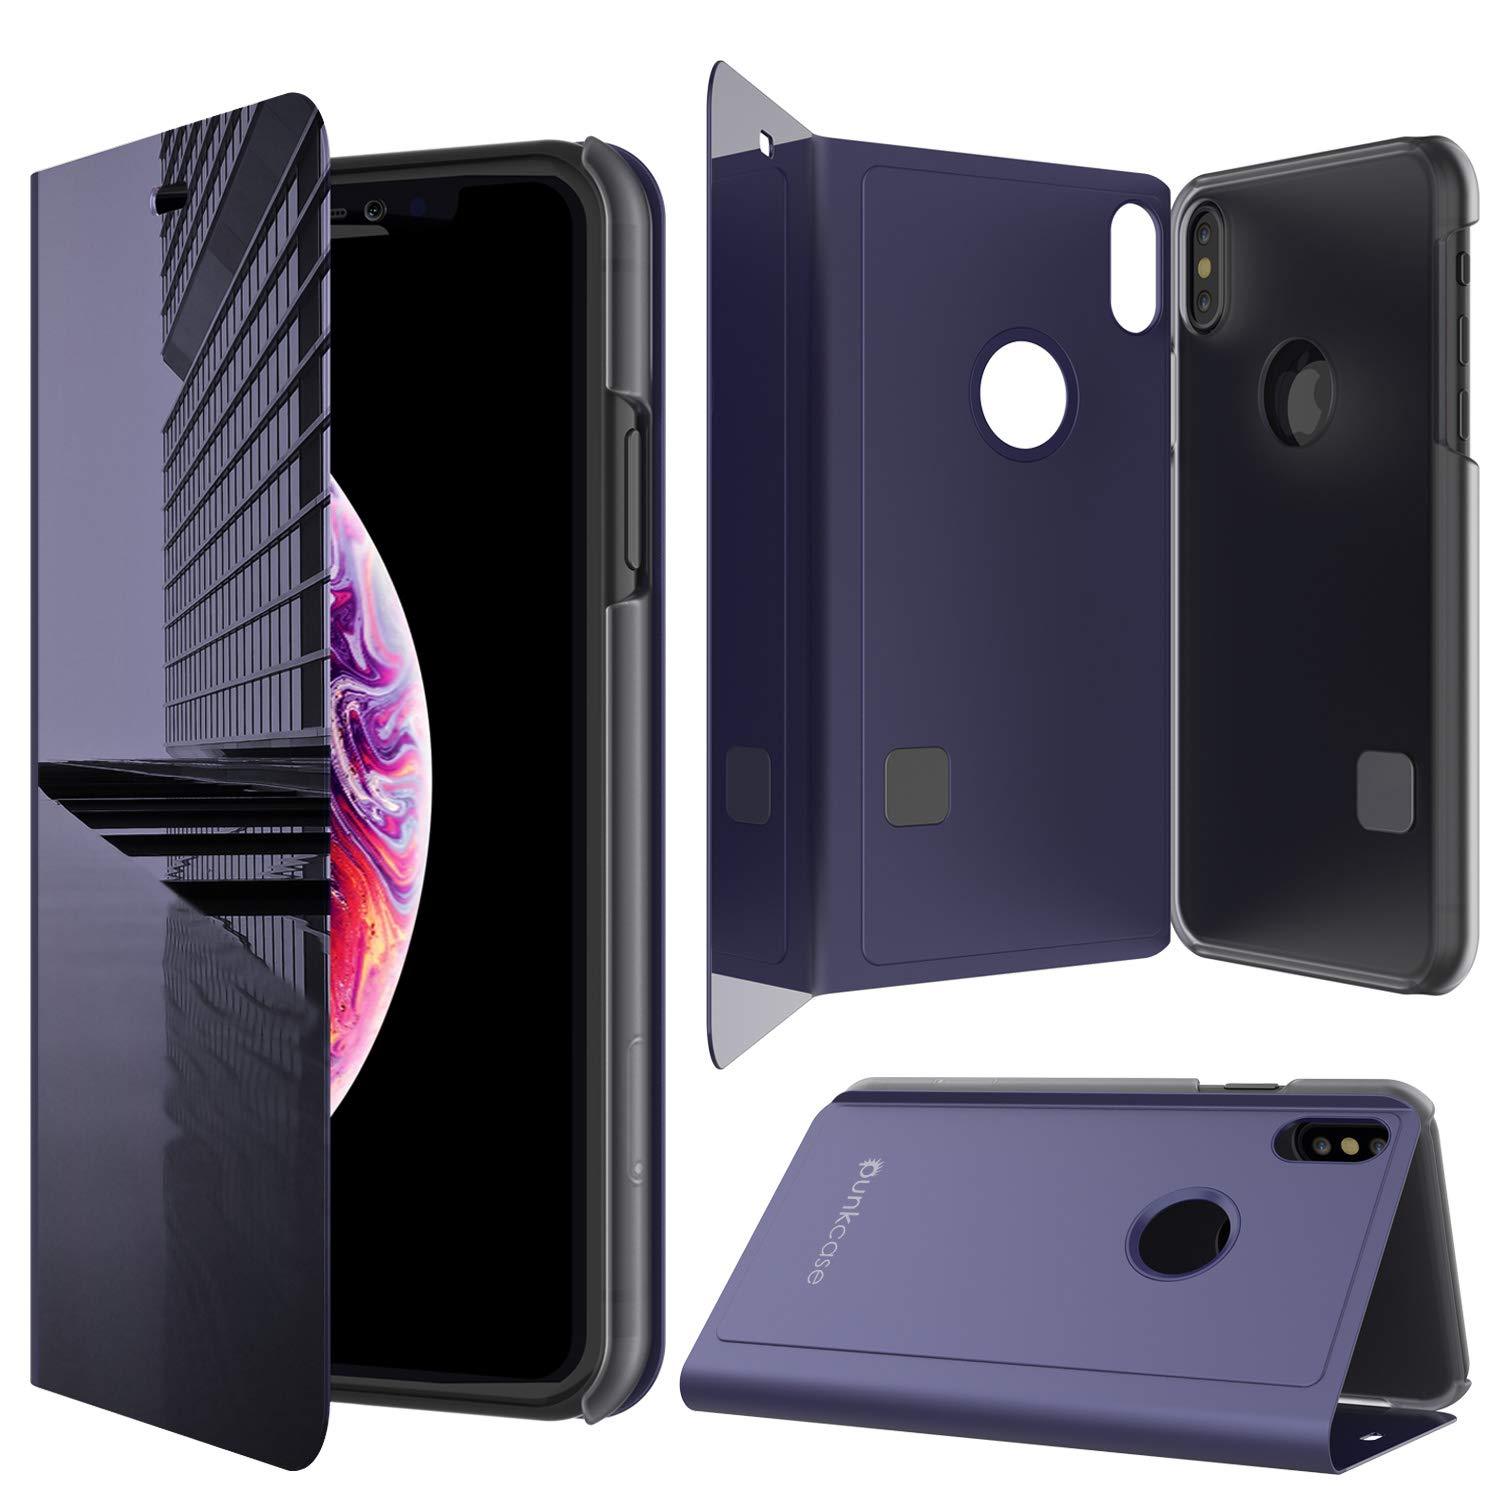 Punkcase iPhone XS Max Reflector Case Protective Flip Cover [Purple]